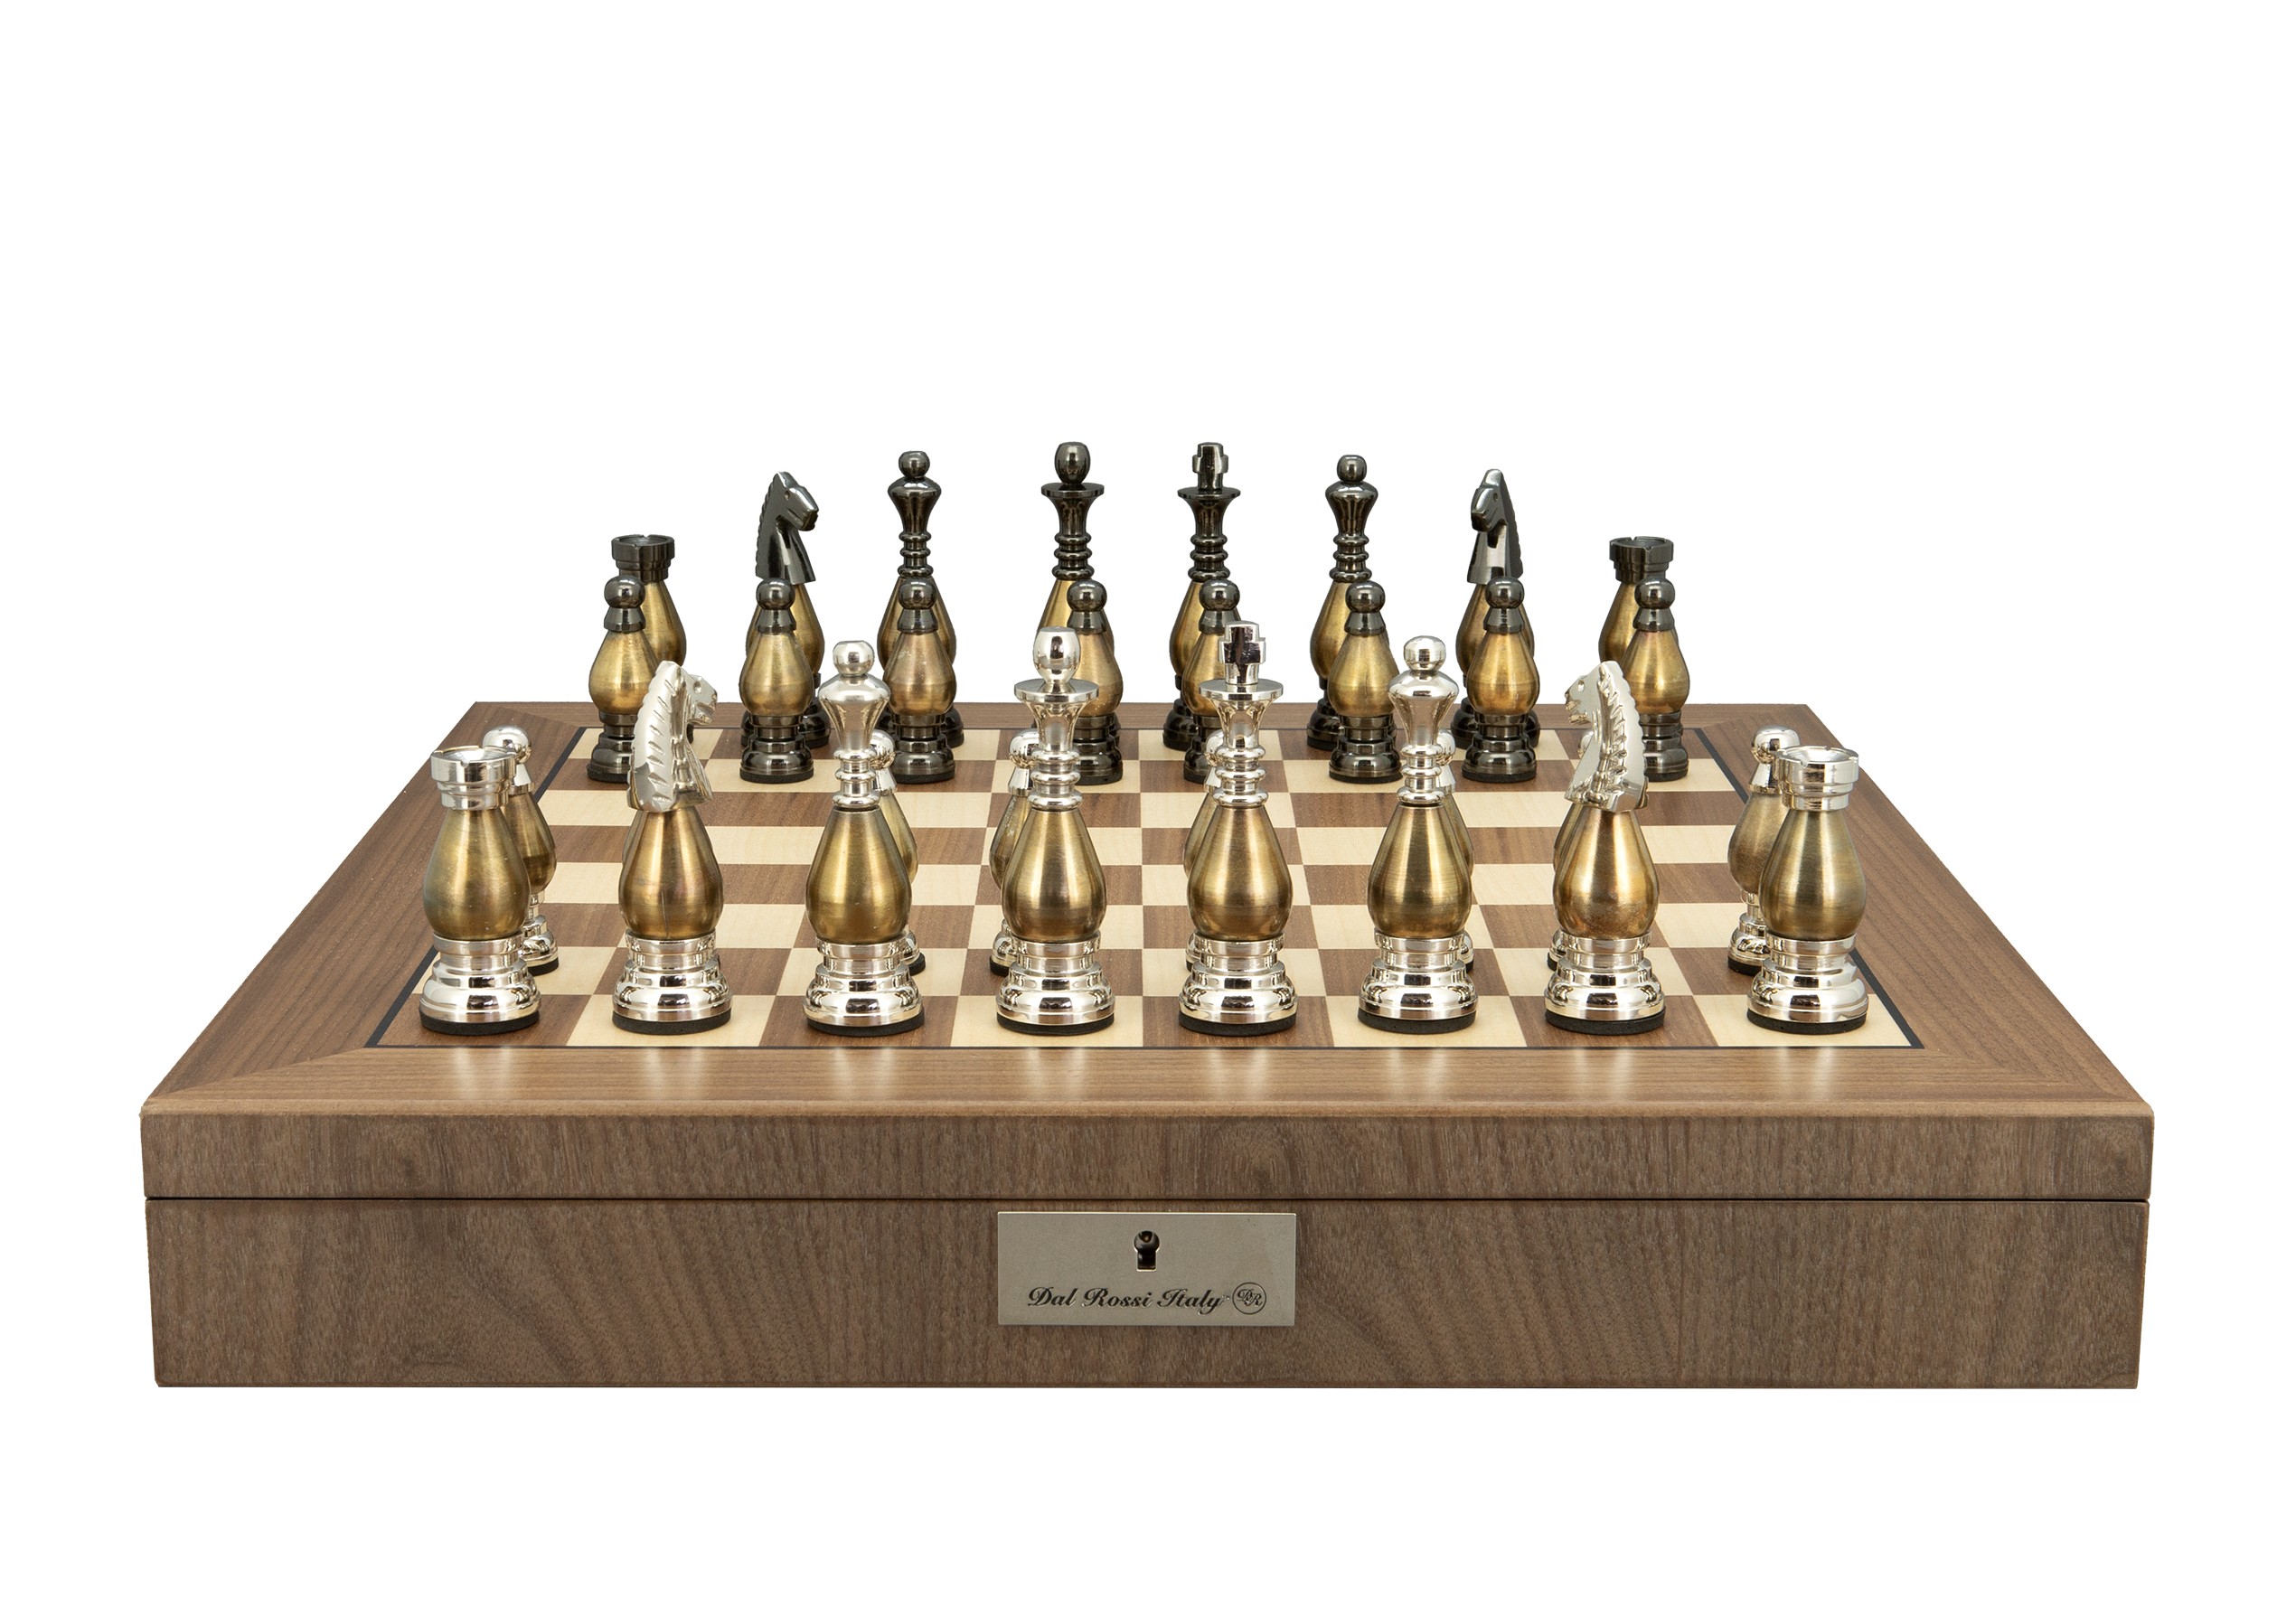 Dal Rossi Italy, Metal light gold plated Chessmen 100mm Chessmen on a Walnut Inlaid Chess Box with Compartments 20"